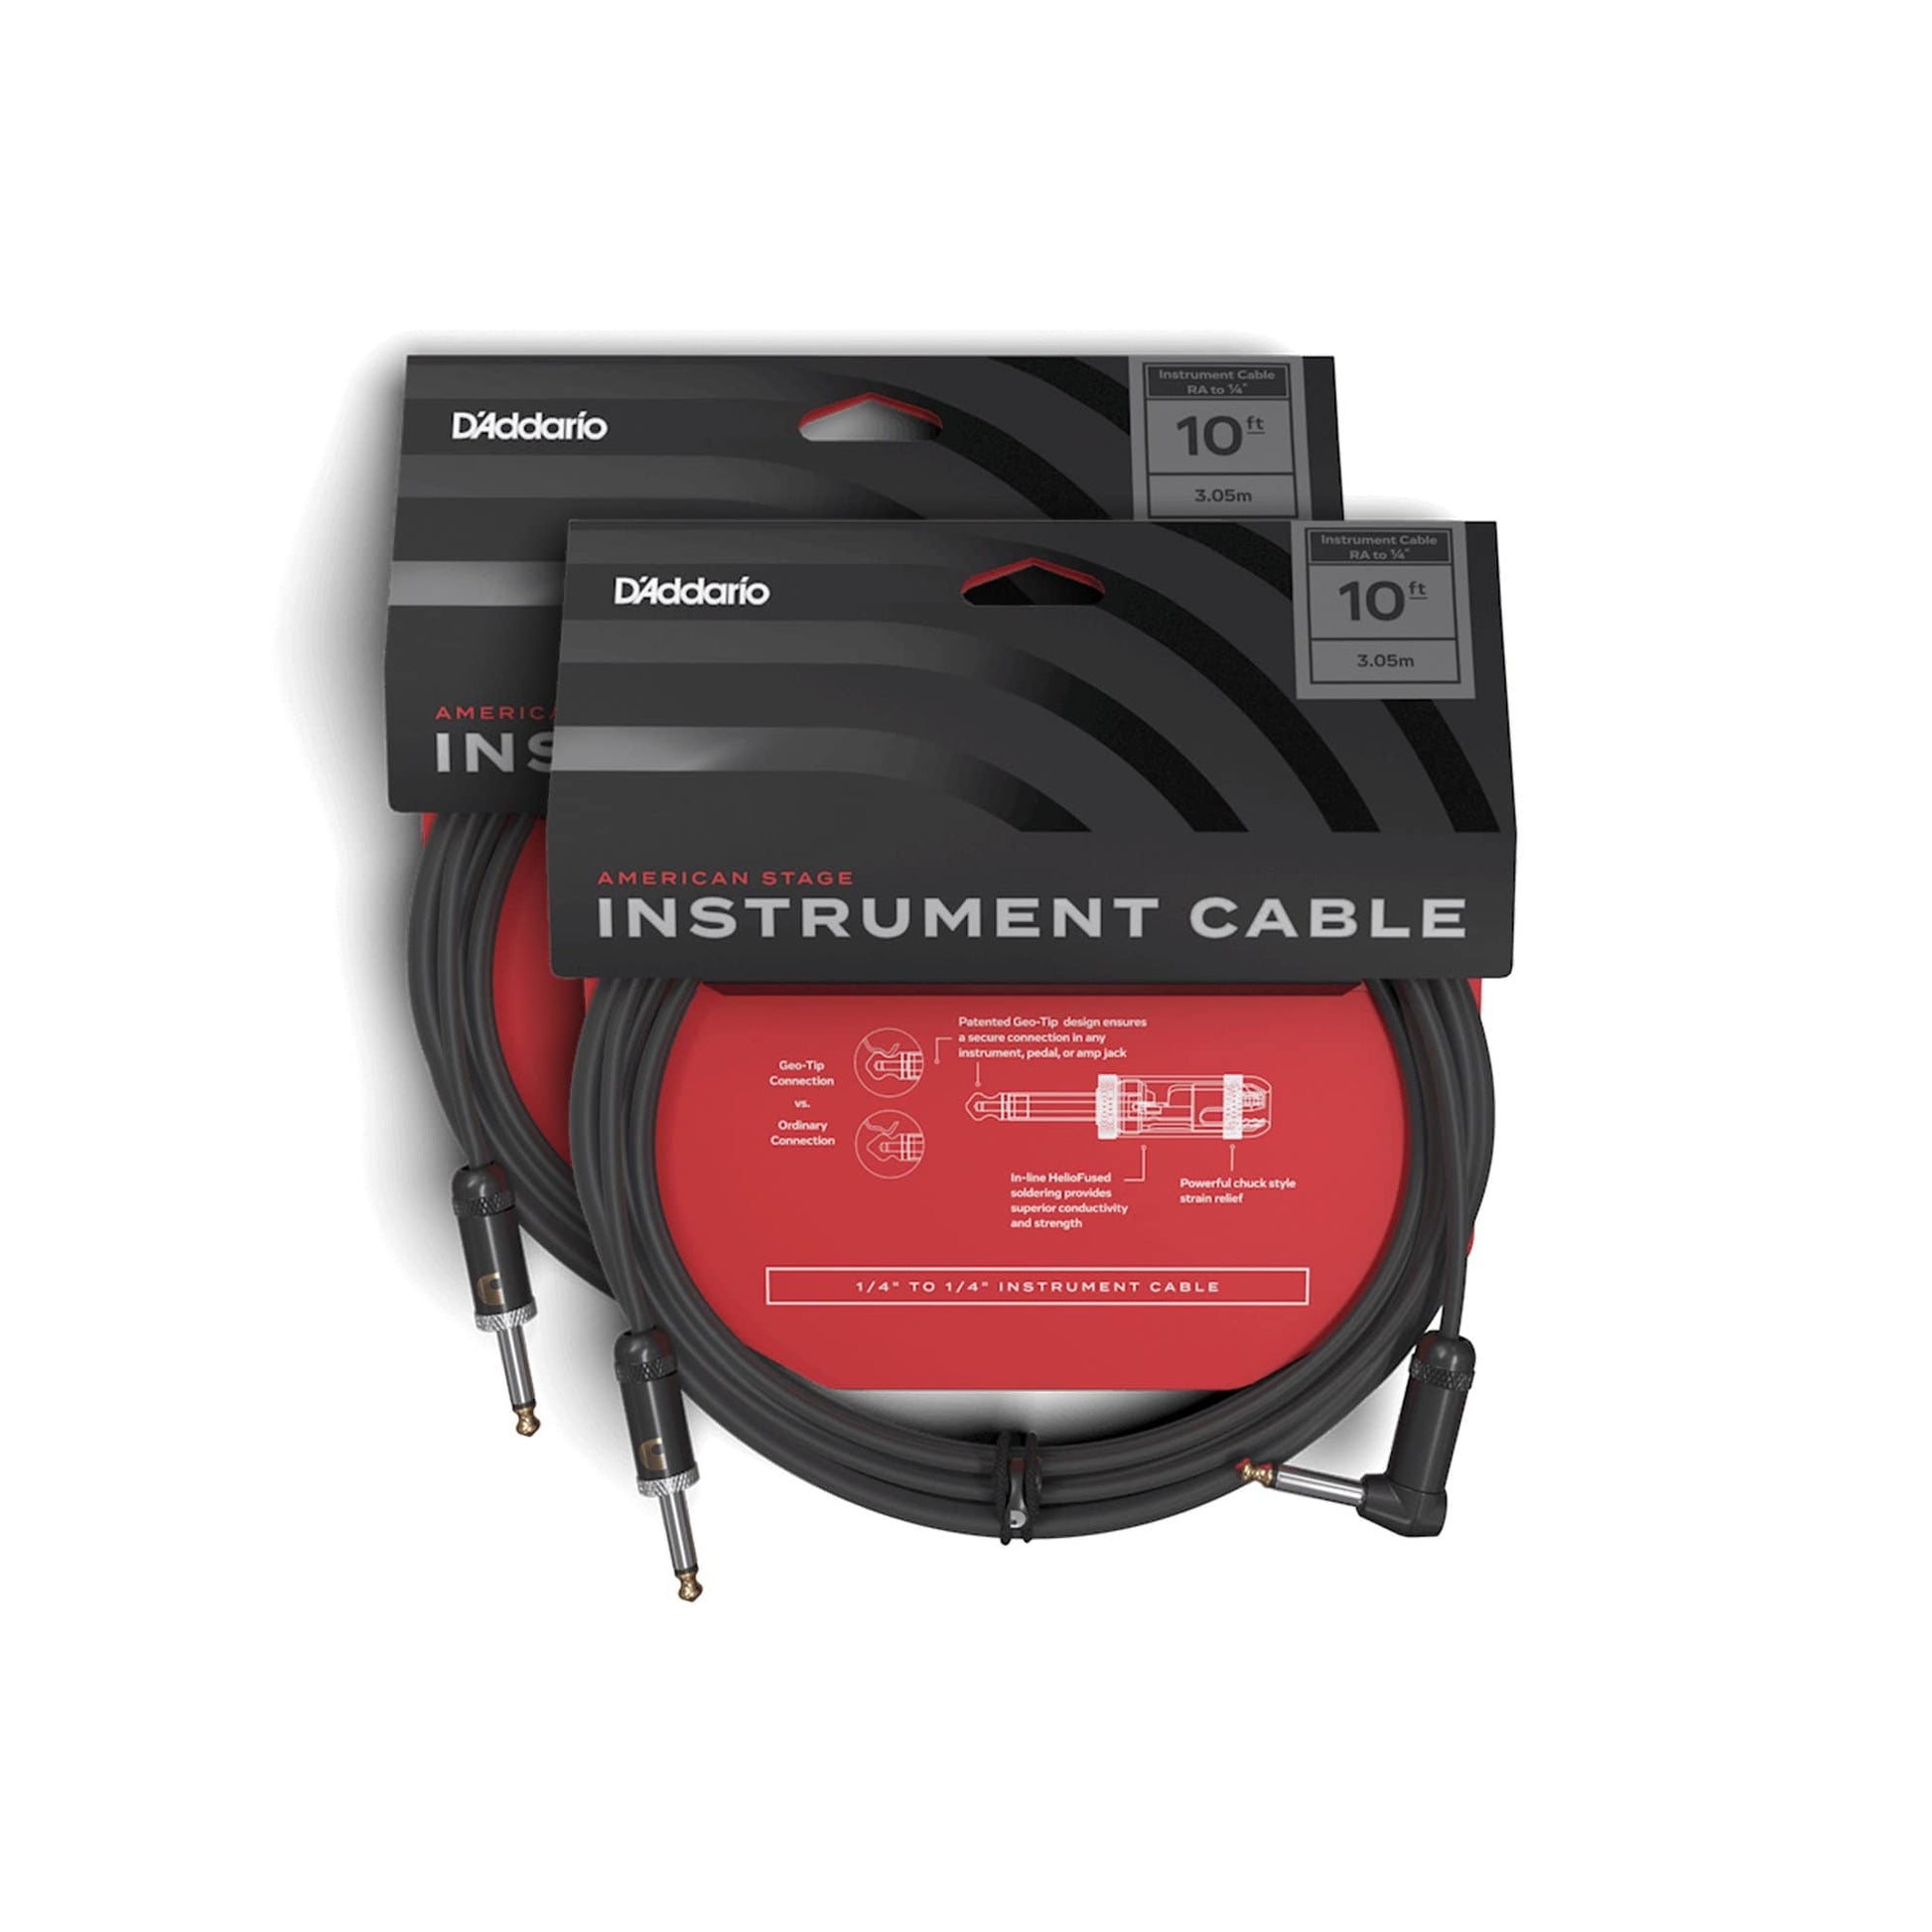 D'Addario American Stage Instrument Cable Right-Angle/Straight 10' 2 Pack Bundle Accessories / Cables